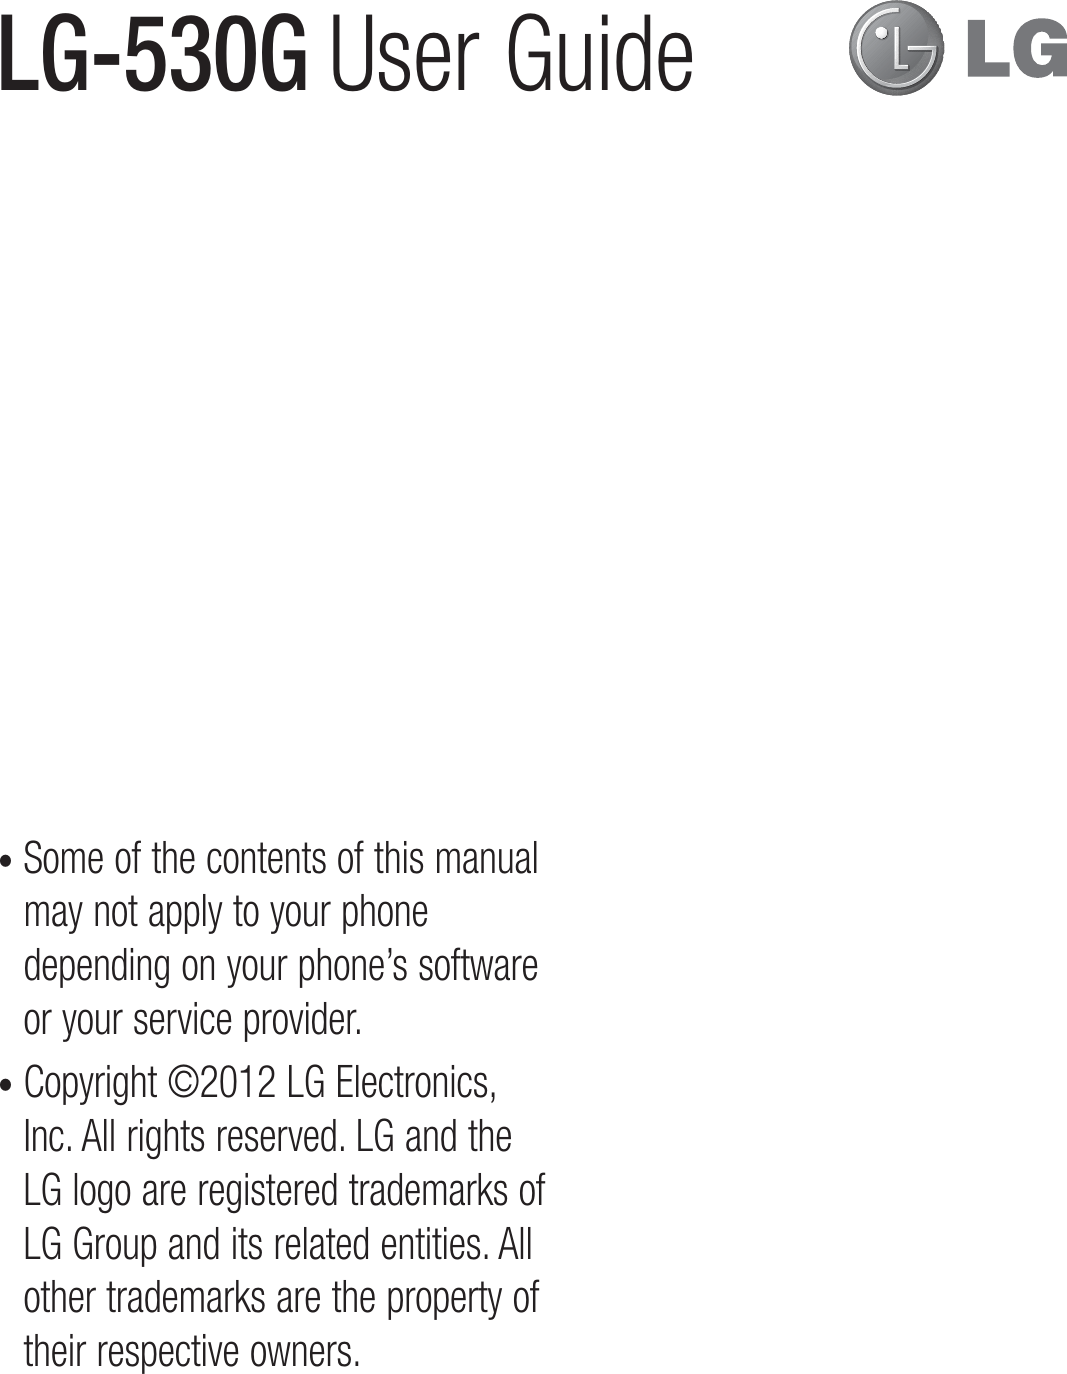 •  Some of the contents of this manual may not apply to your phone depending on your phone’s software or your service provider.•  Copyright ©2012 LG Electronics, Inc. All rights reserved. LG and the LG logo are registered trademarks of LG Group and its related entities. All other trademarks are the property of their respective owners.LG-530G  User Guide